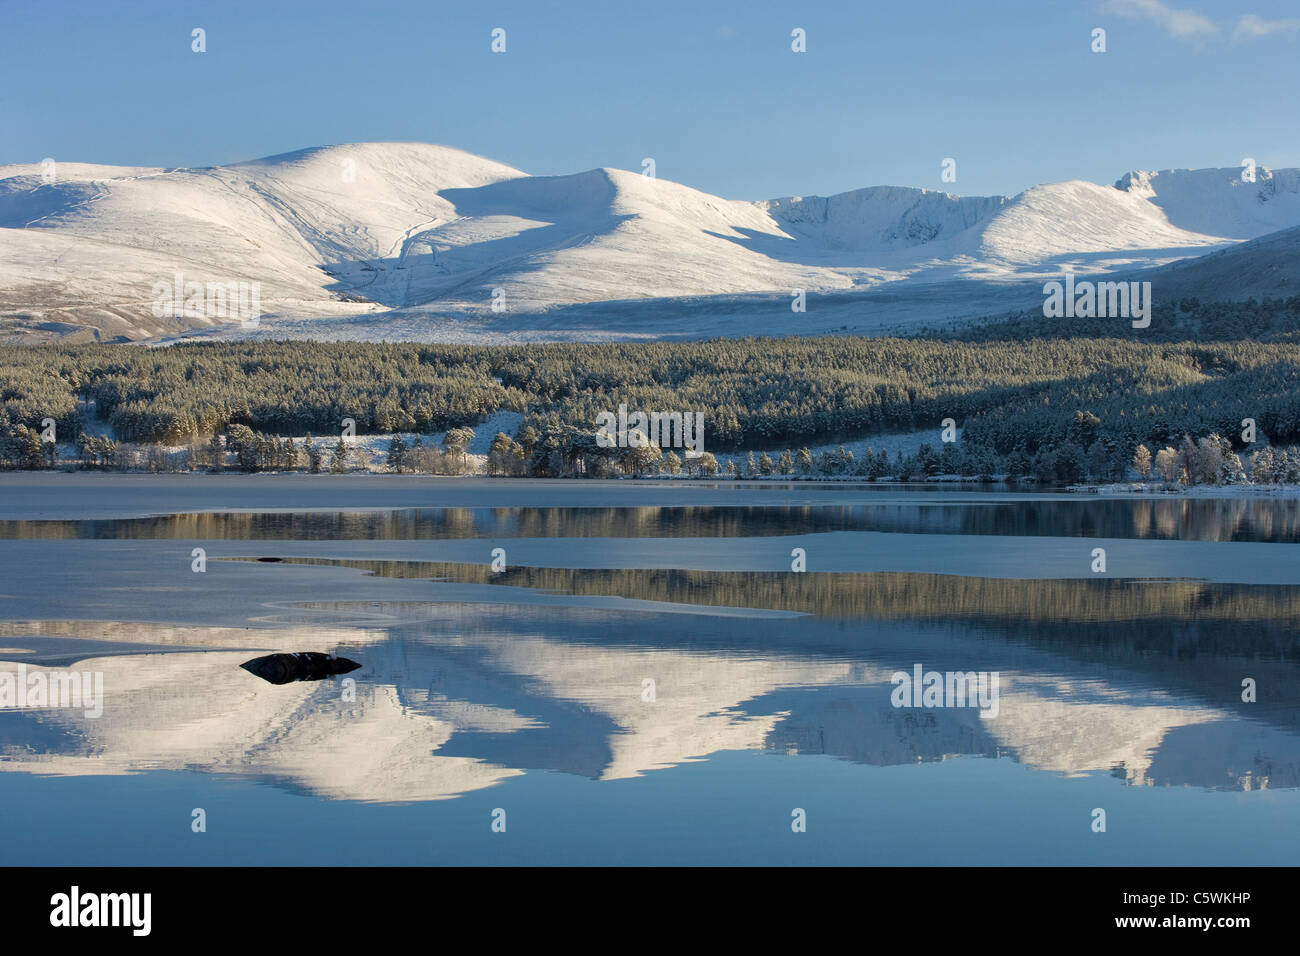 Loch Morlich and Cairngorm Mountains in winter, Cairngorms National Park, Scotland, Great Britain. Stock Photo